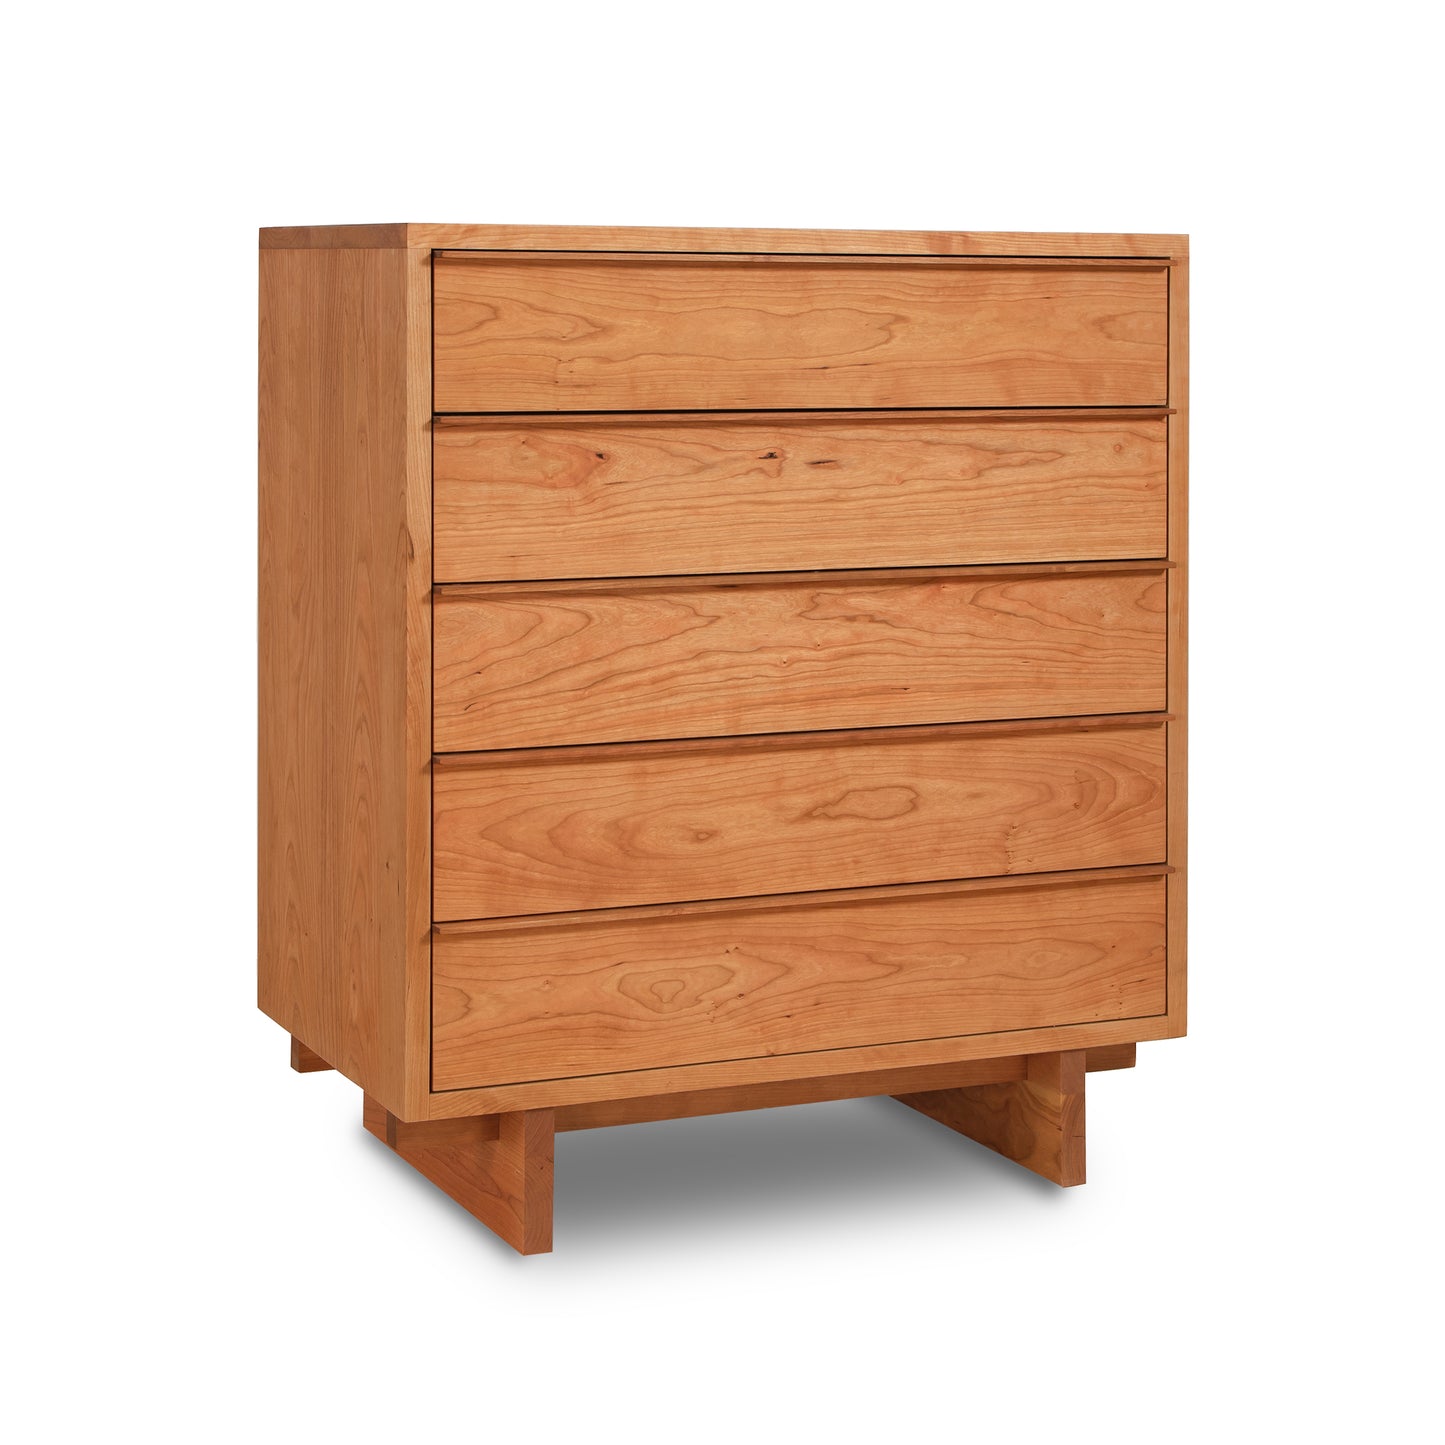 A Vermont craftsmanship handcrafted Vermont Furniture Designs Kipling 5-Drawer Wide Chest on a white background.